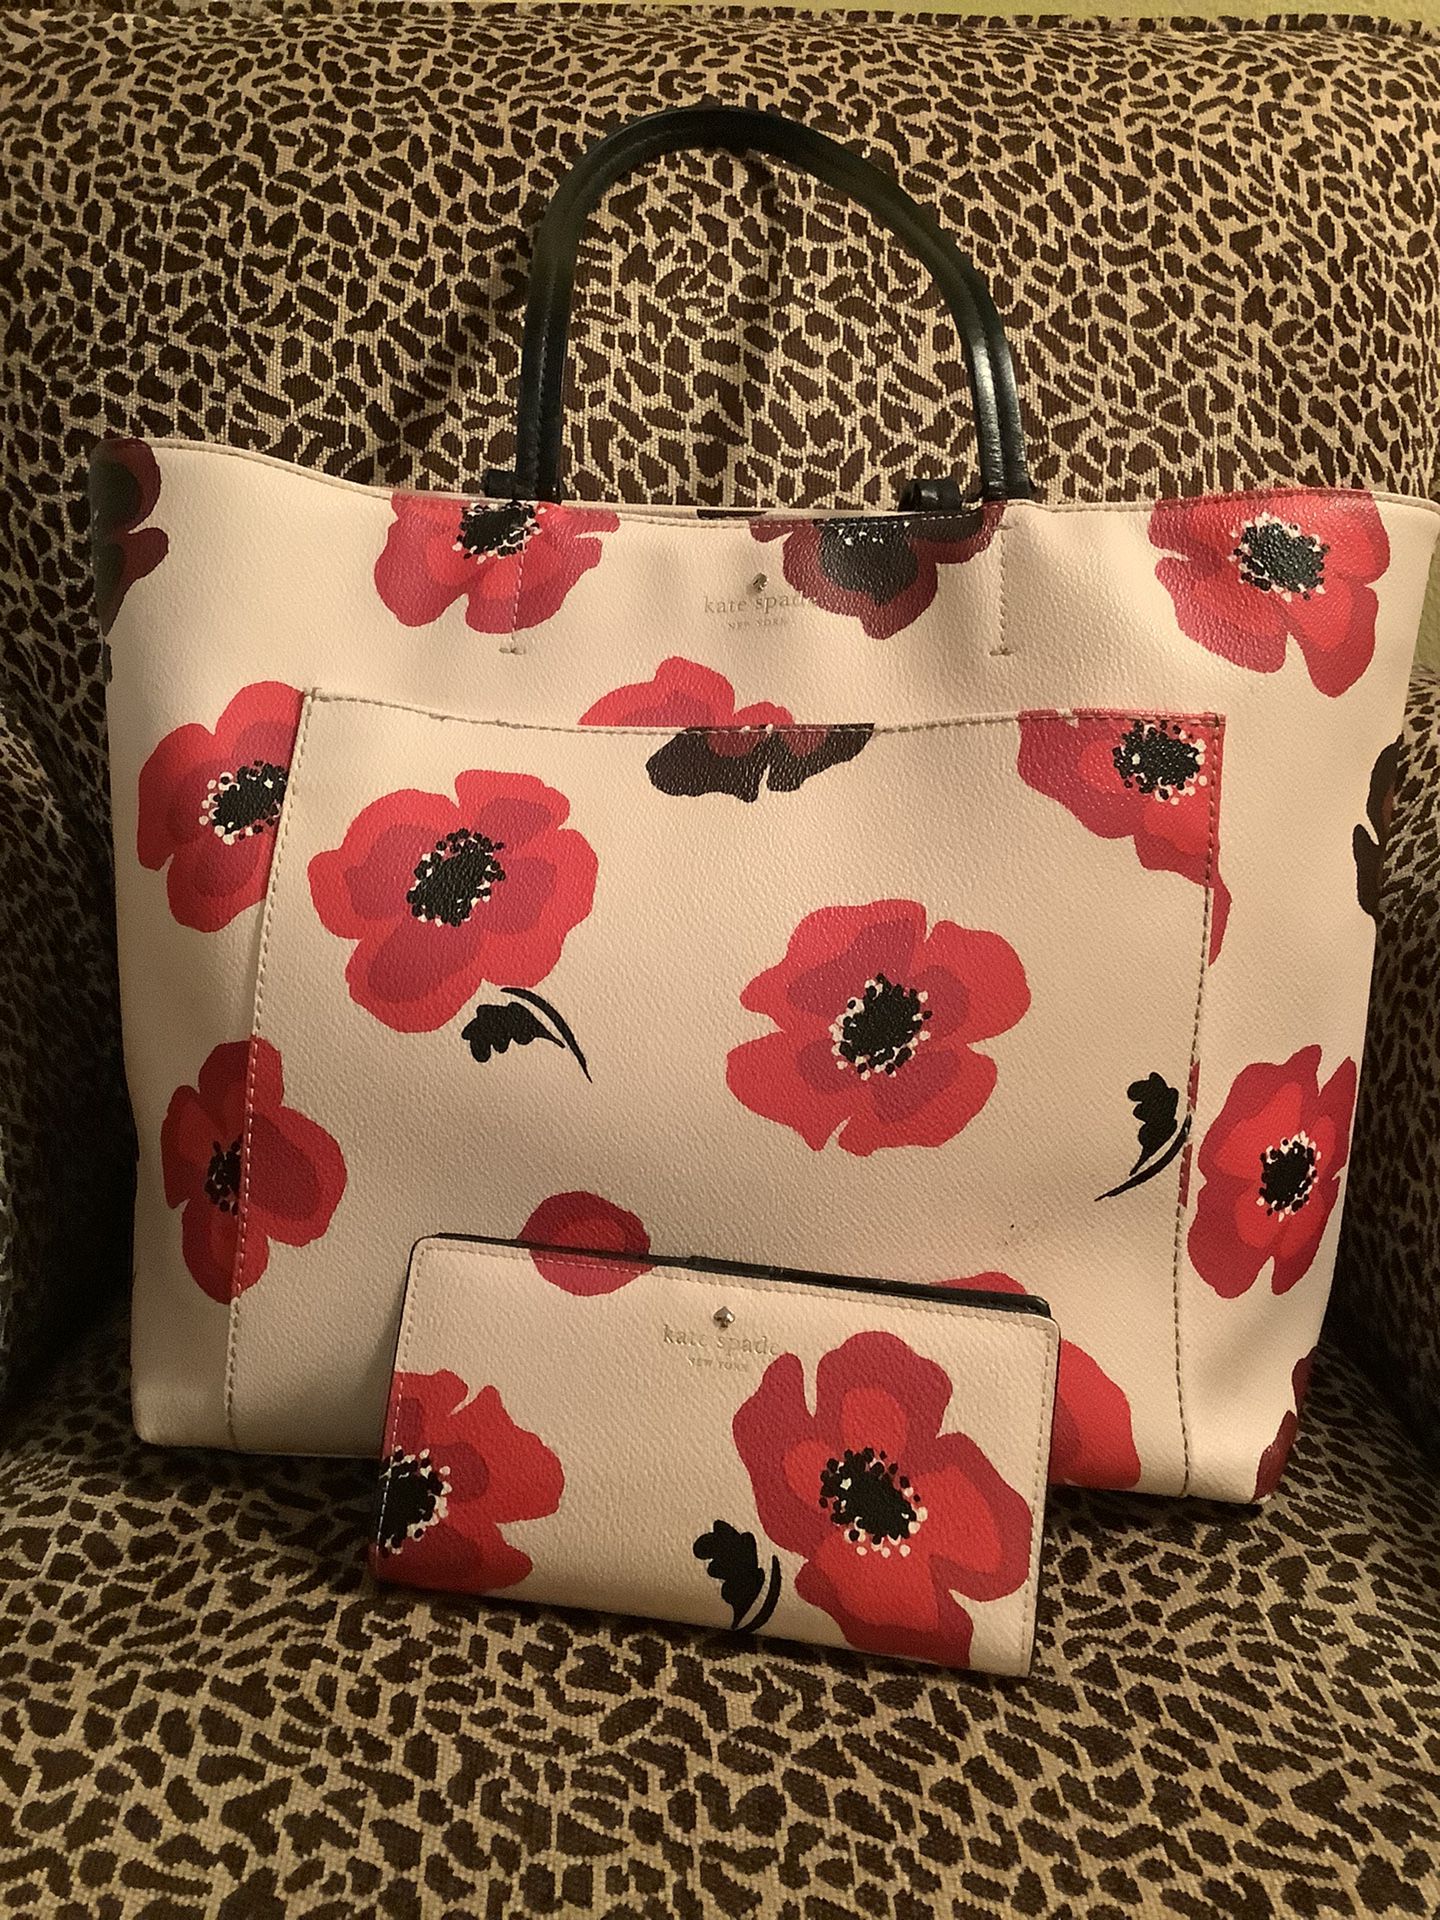 Kate Spade Poppy Tote Bag With Matching Wallet